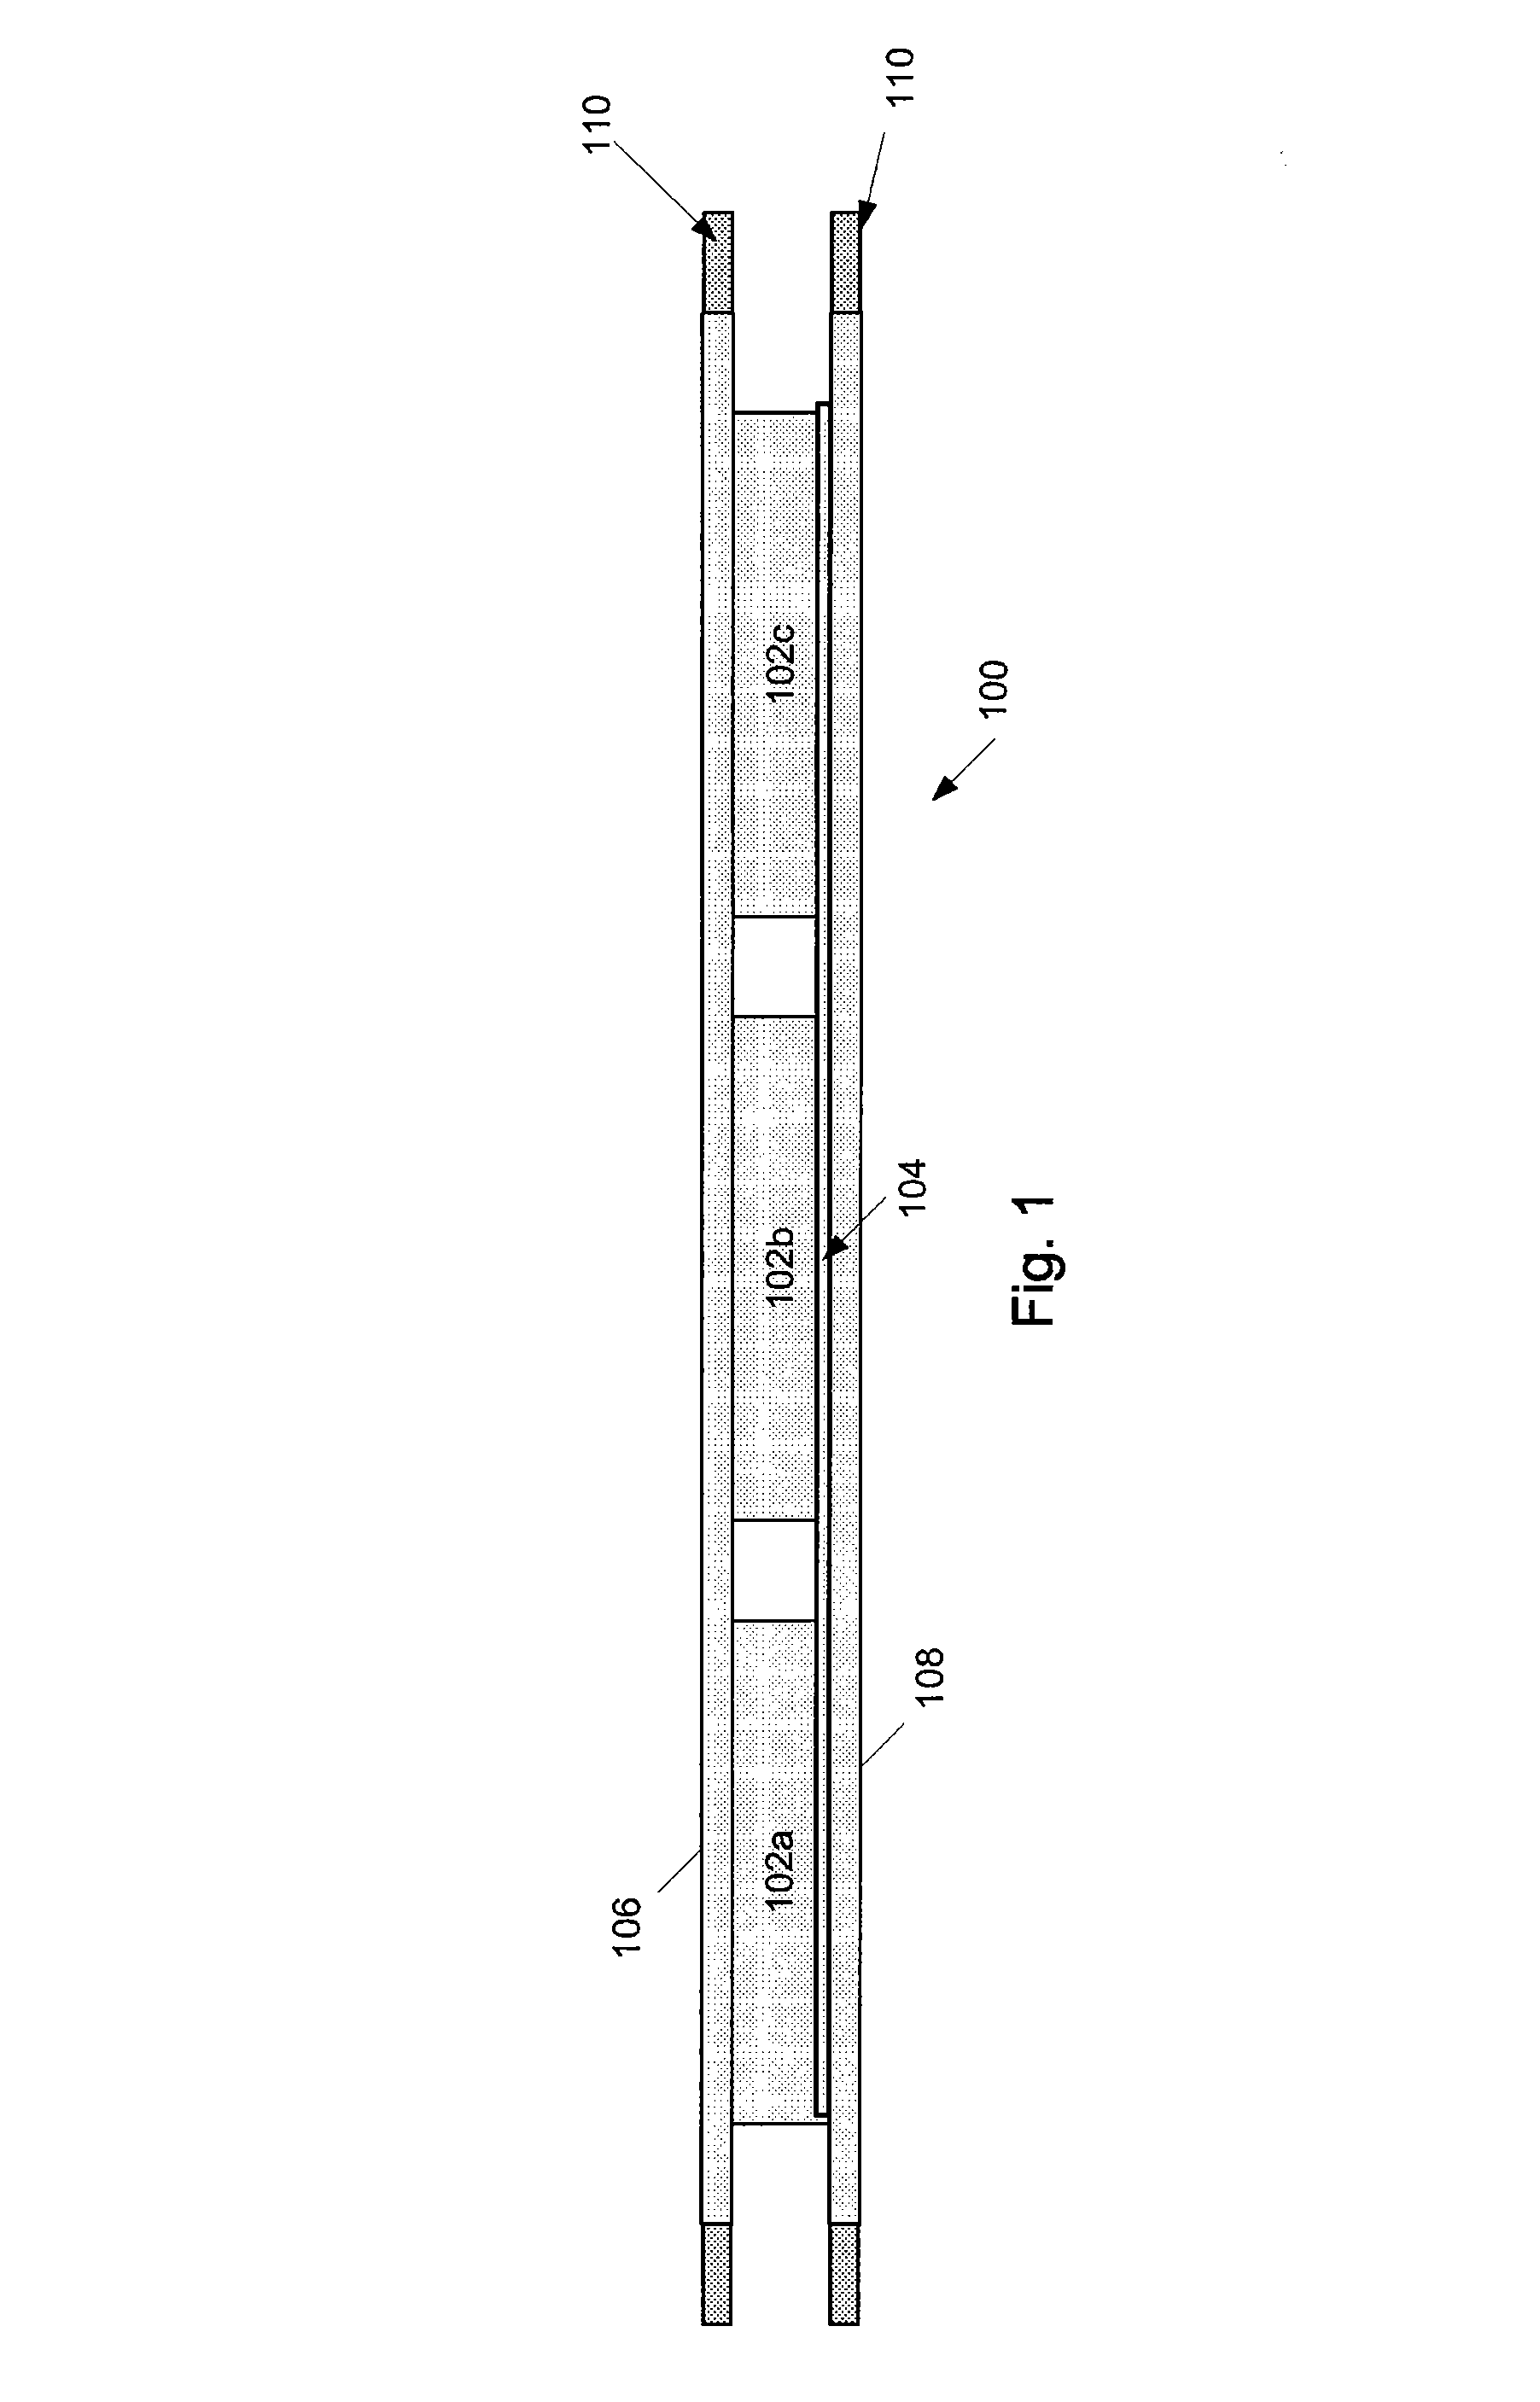 Battery assembly for battery powered portable devices